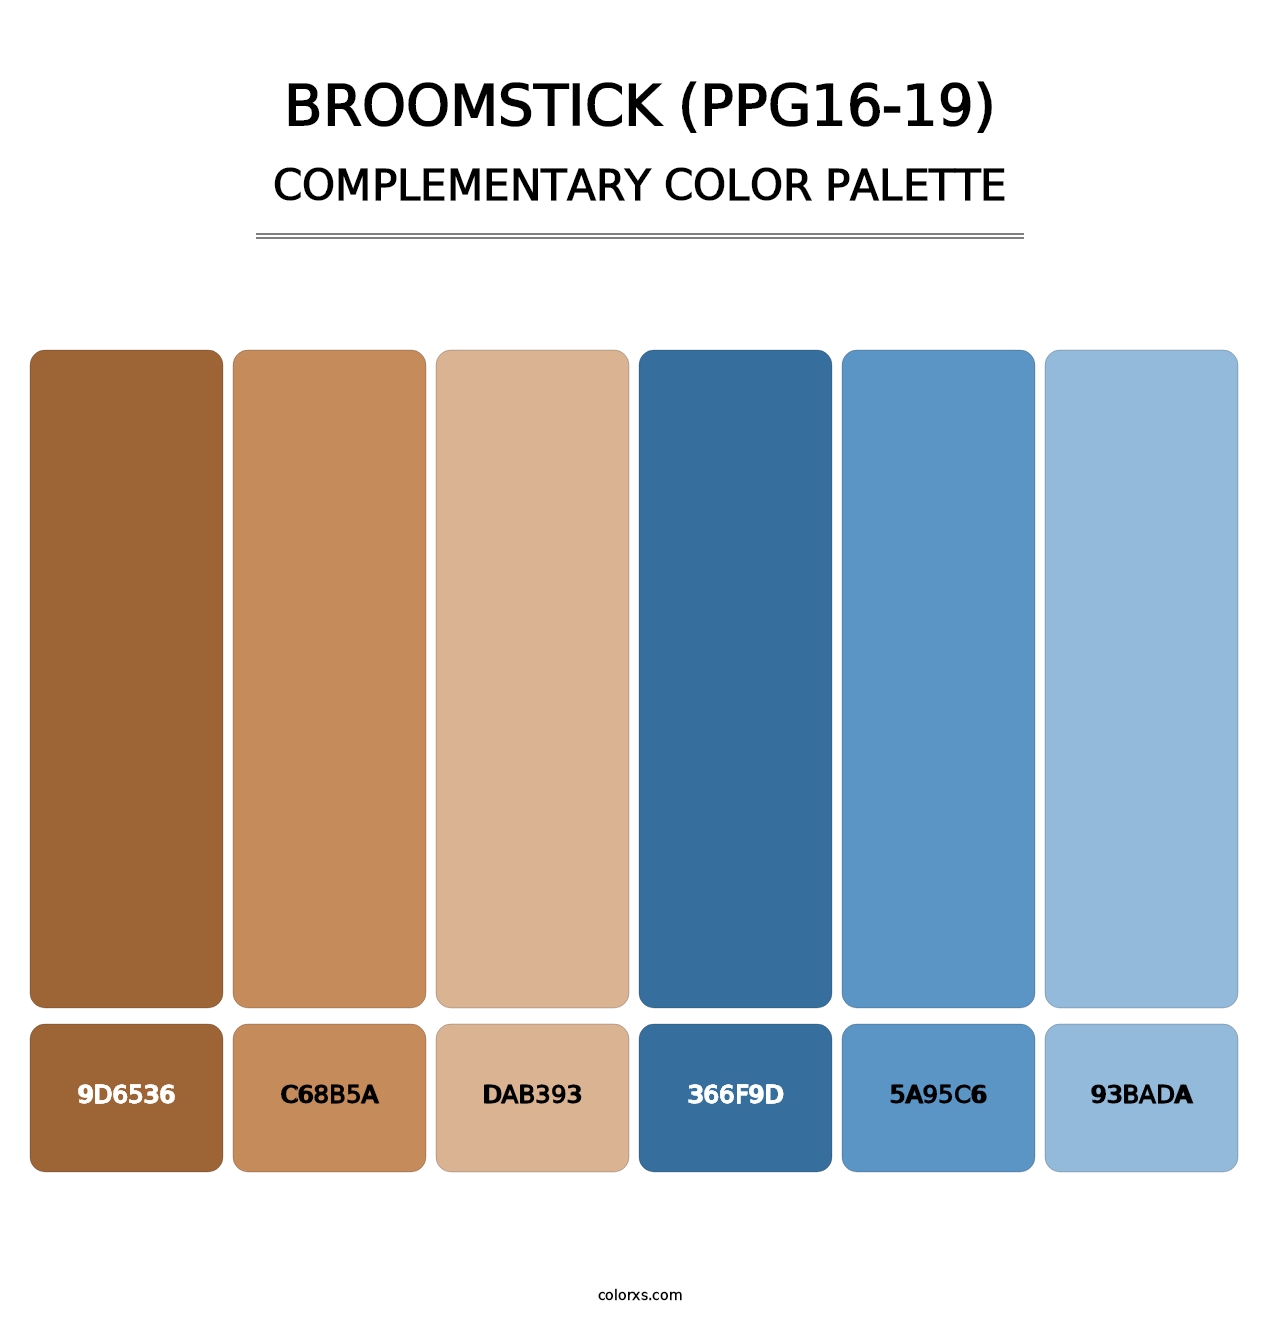 Broomstick (PPG16-19) - Complementary Color Palette